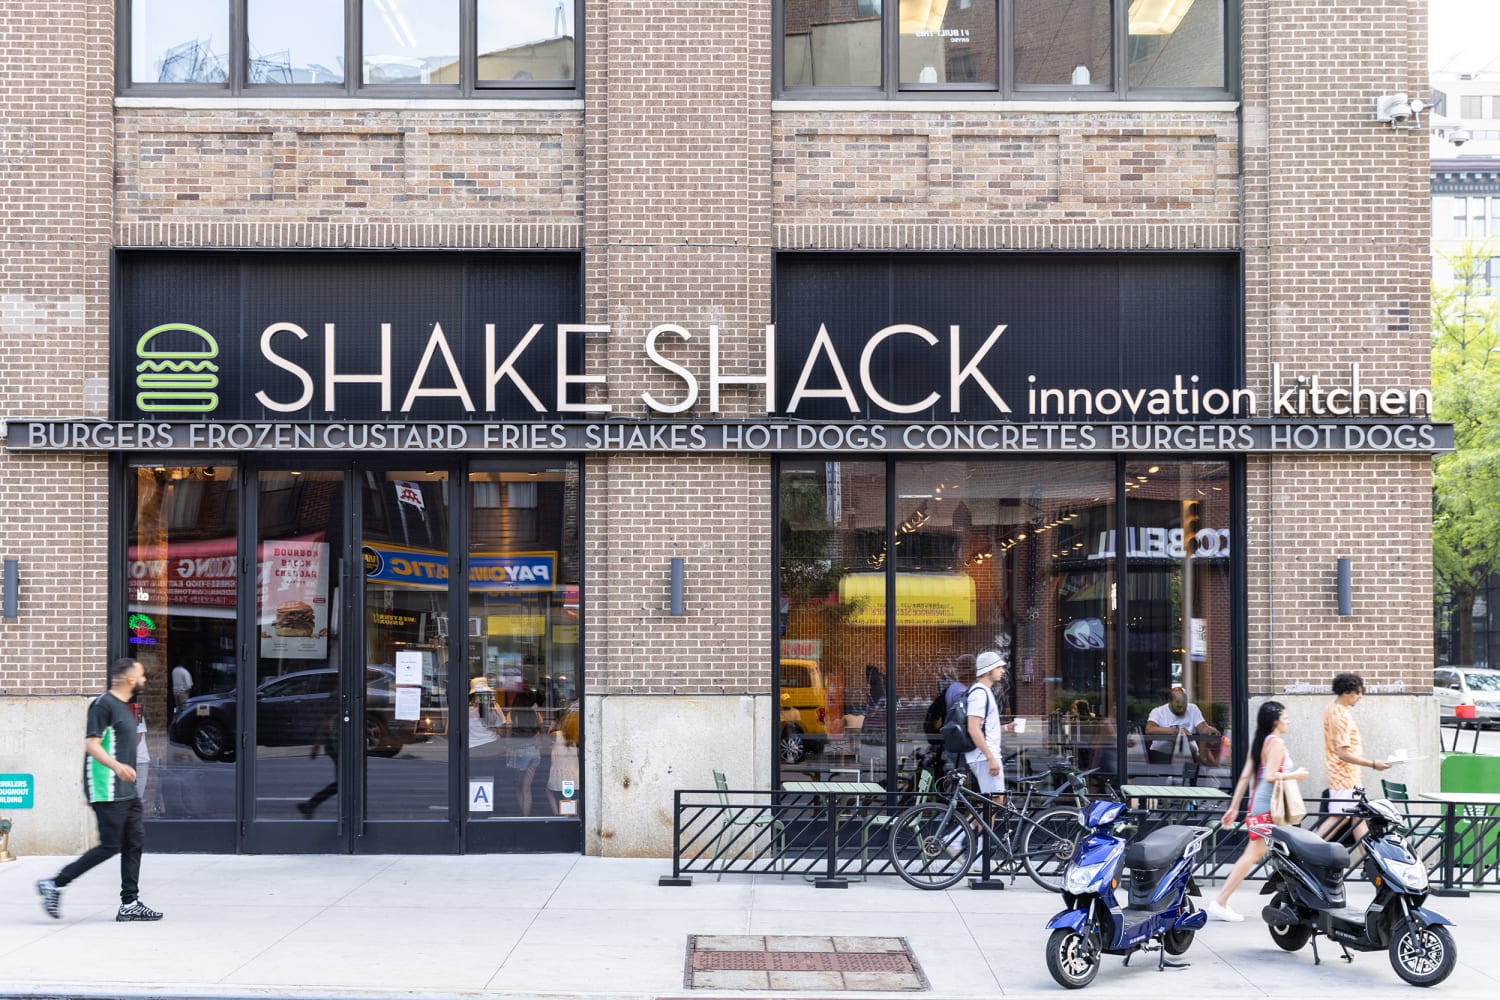 Shake Shack seemingly shades Chick-fil-A by offering free chicken sandwiches on Sundays